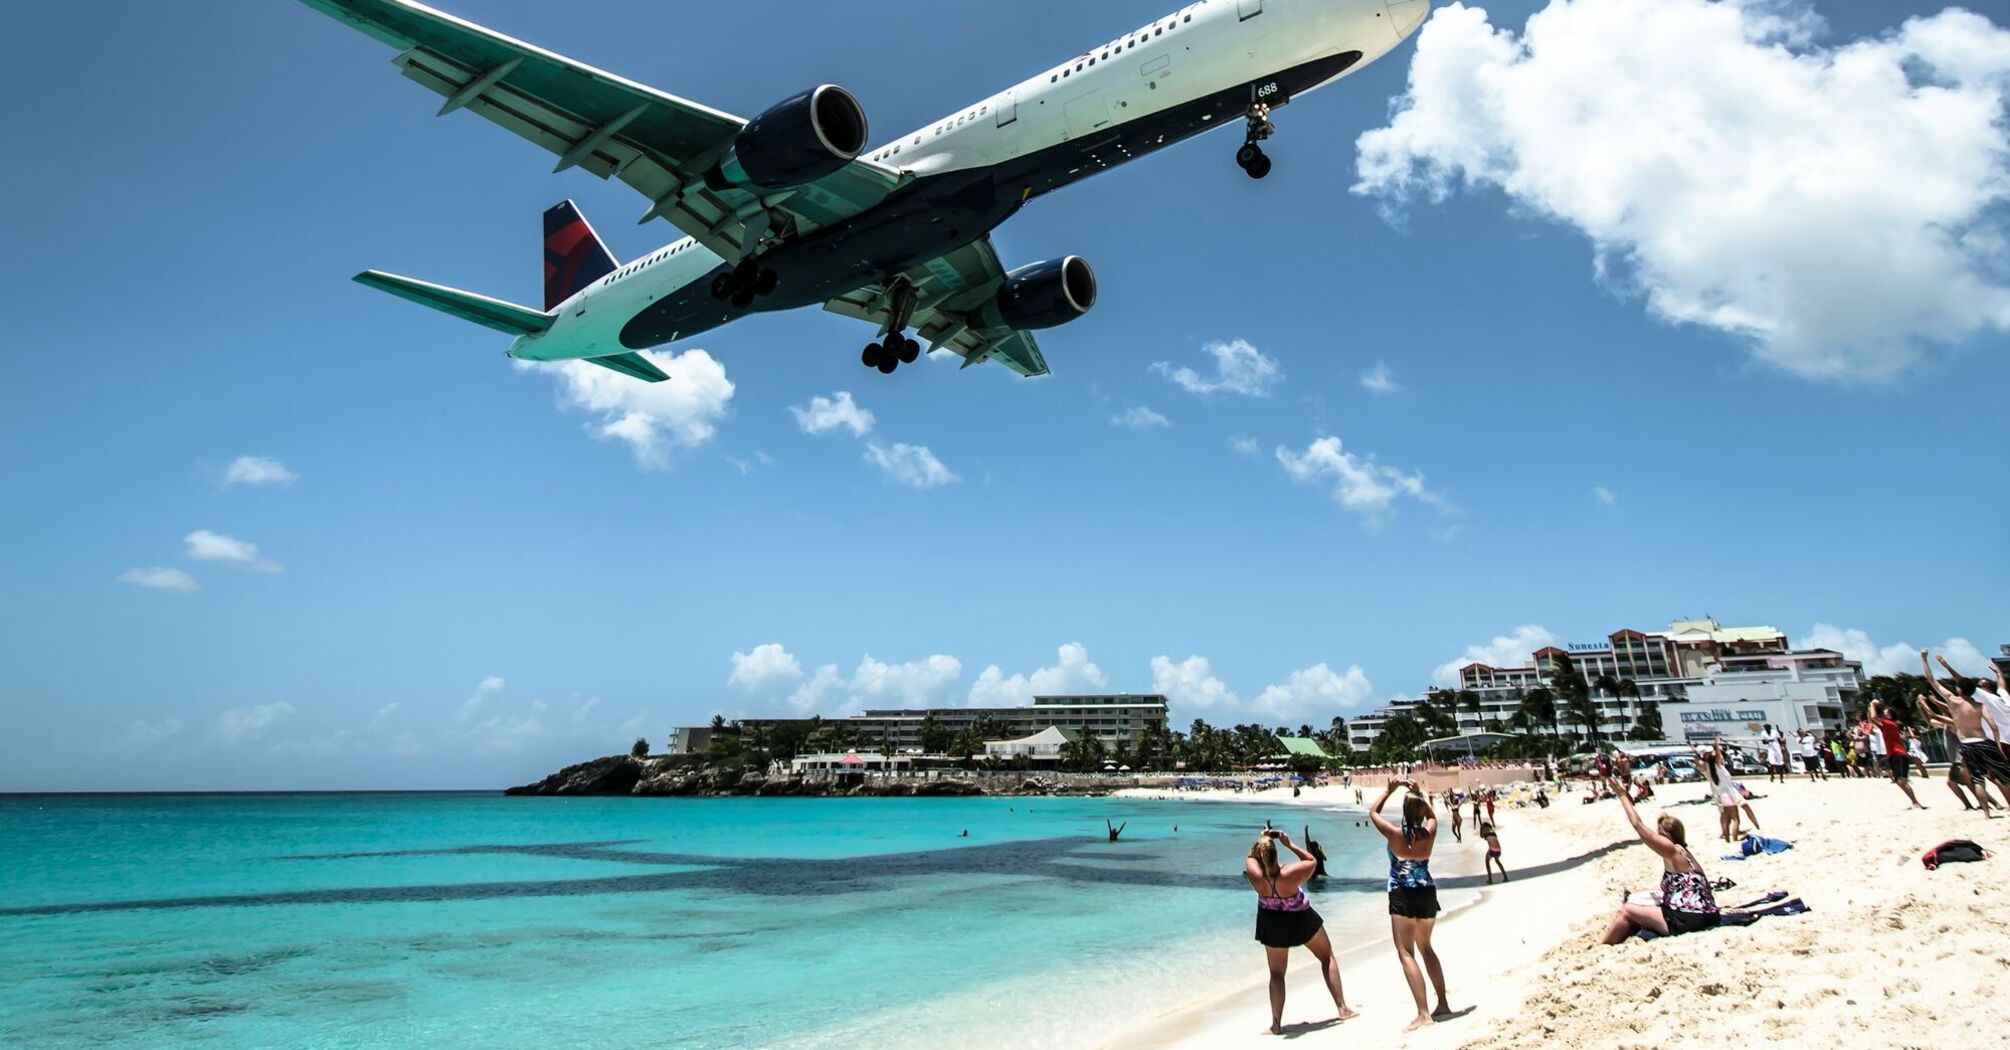 A Delta airplane landing over a sunny beach with clear turquoise waters, as onlookers on the sand take photos and watch 